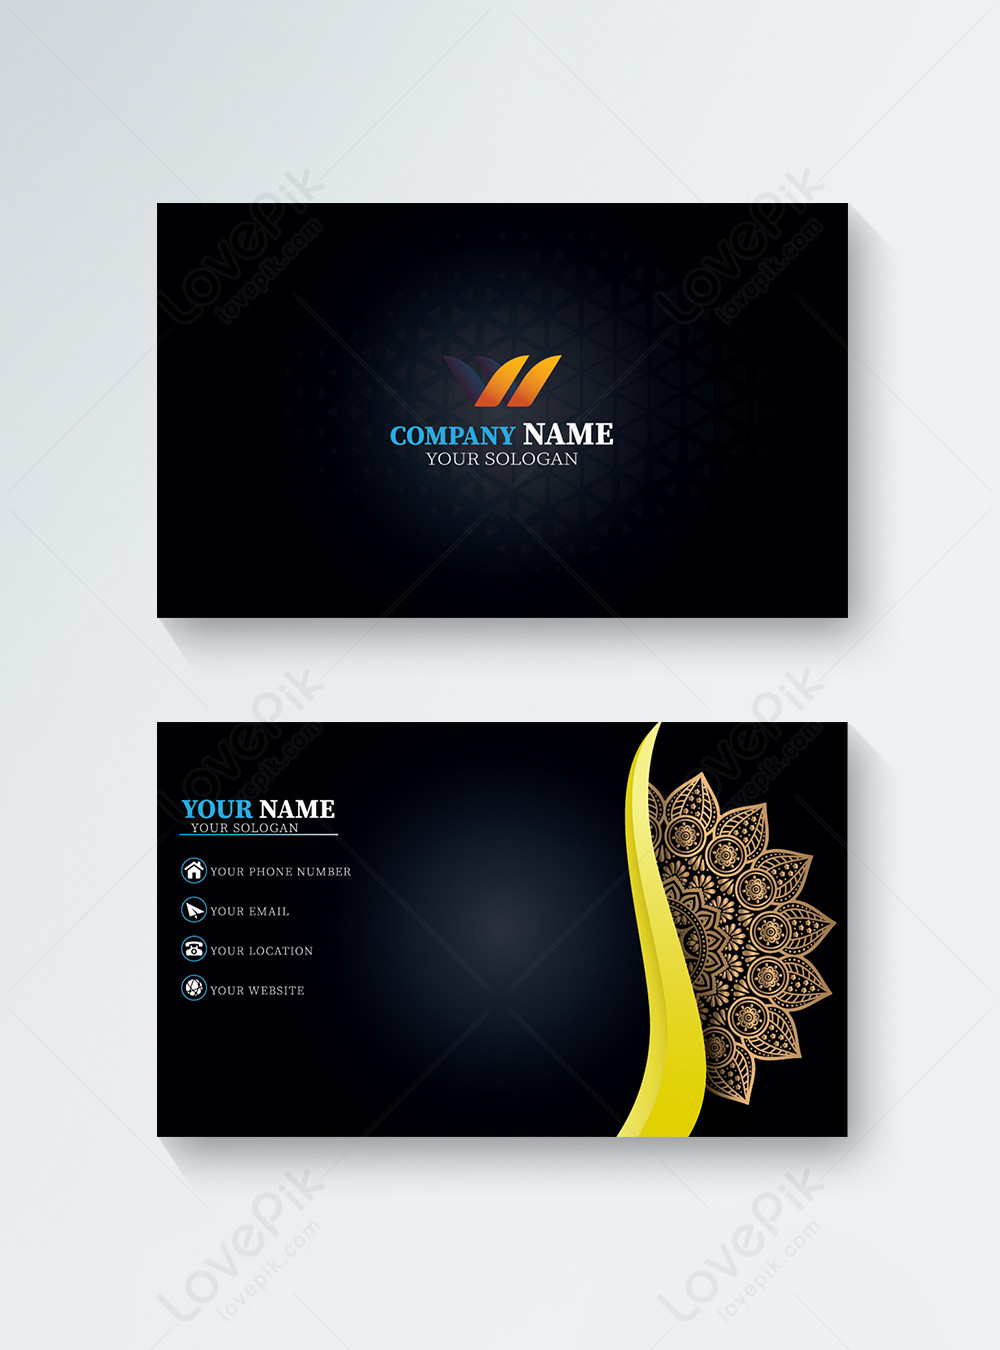 Professional business card design template image_picture free download ...